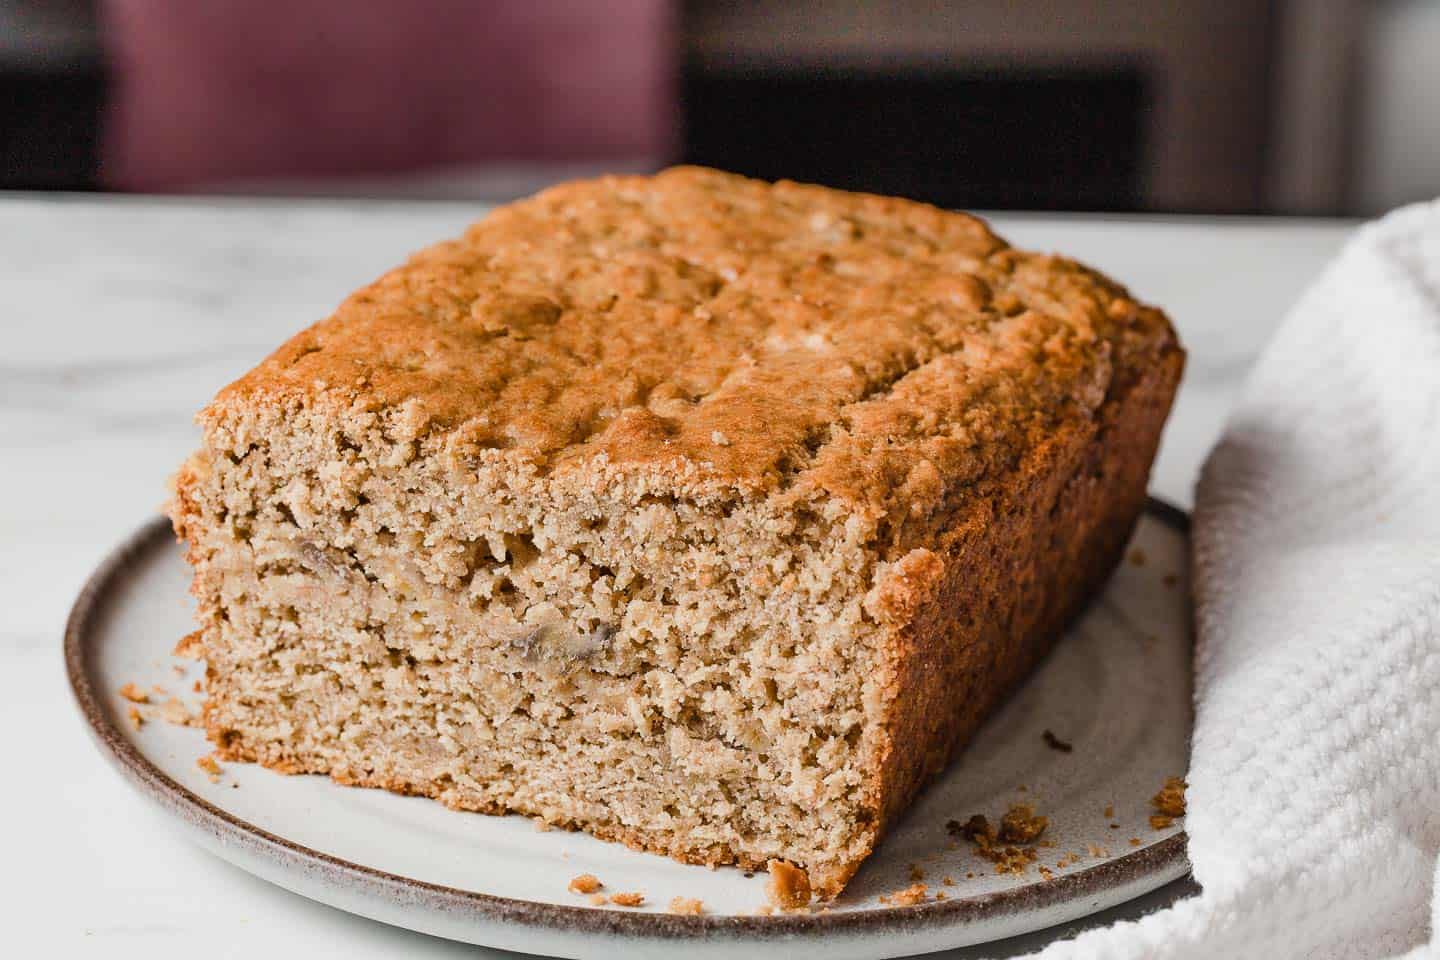 A loaf of sourdough banana bread on a plate.